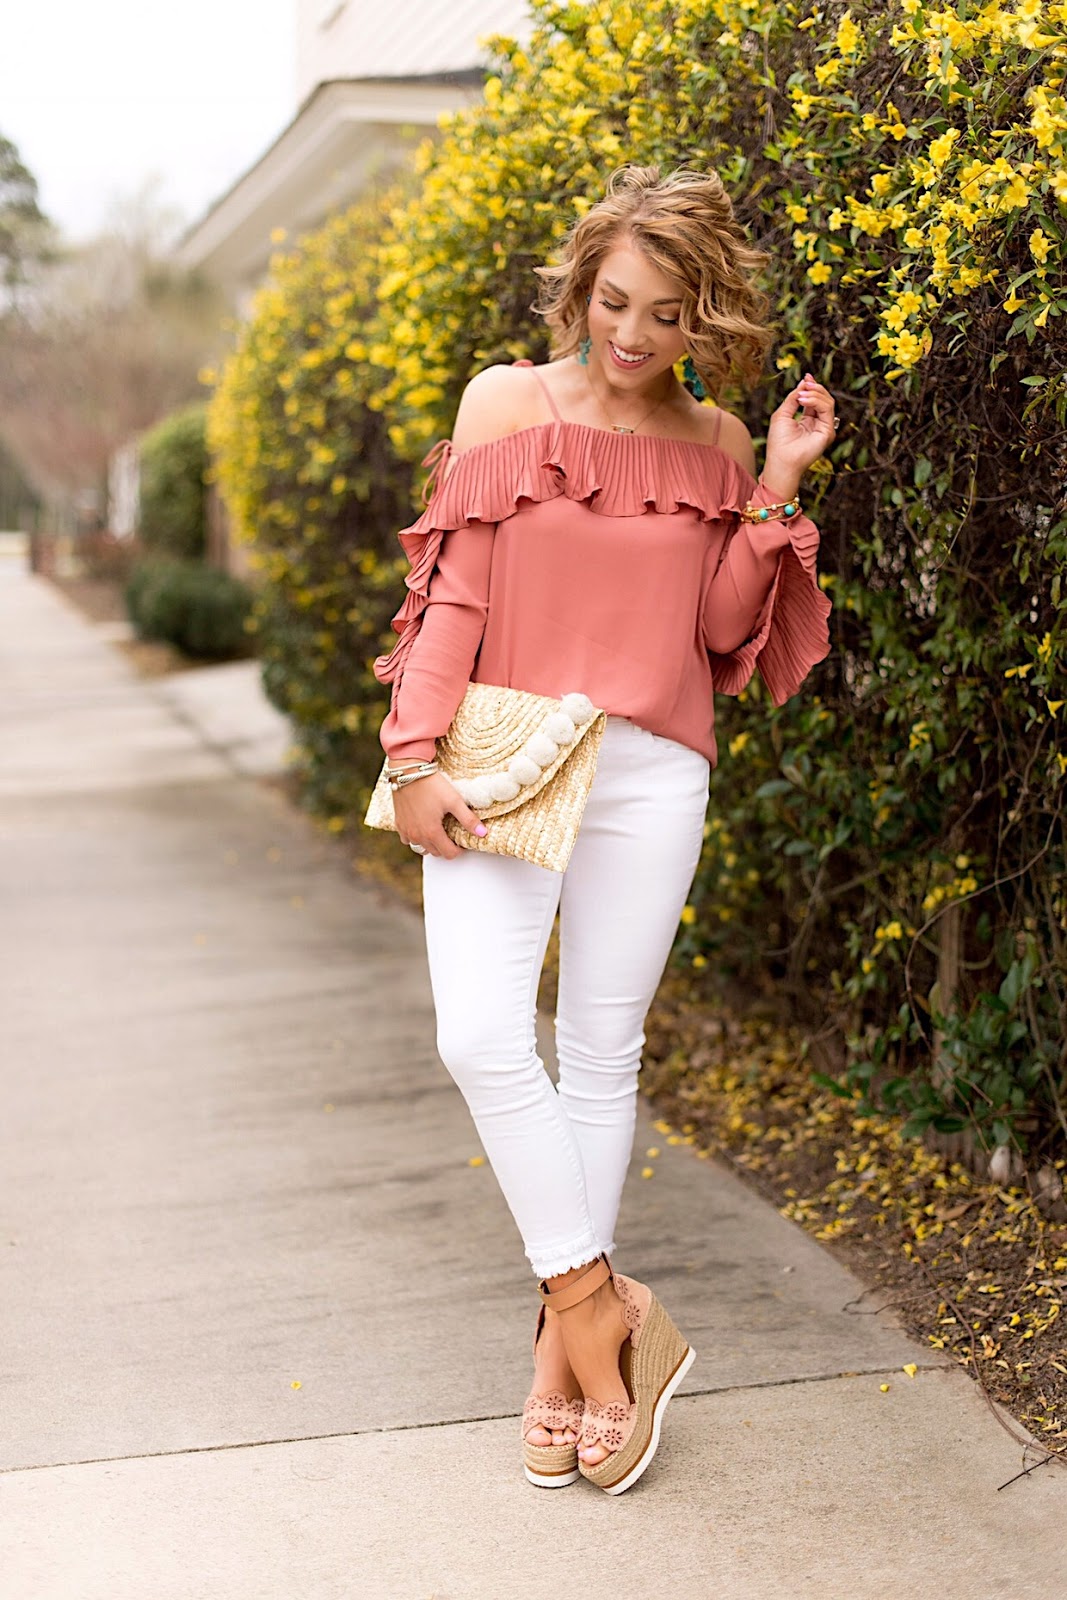 My Favorite White Jeans and Wedges for spring - Click through to see more on Something Delightful Blog